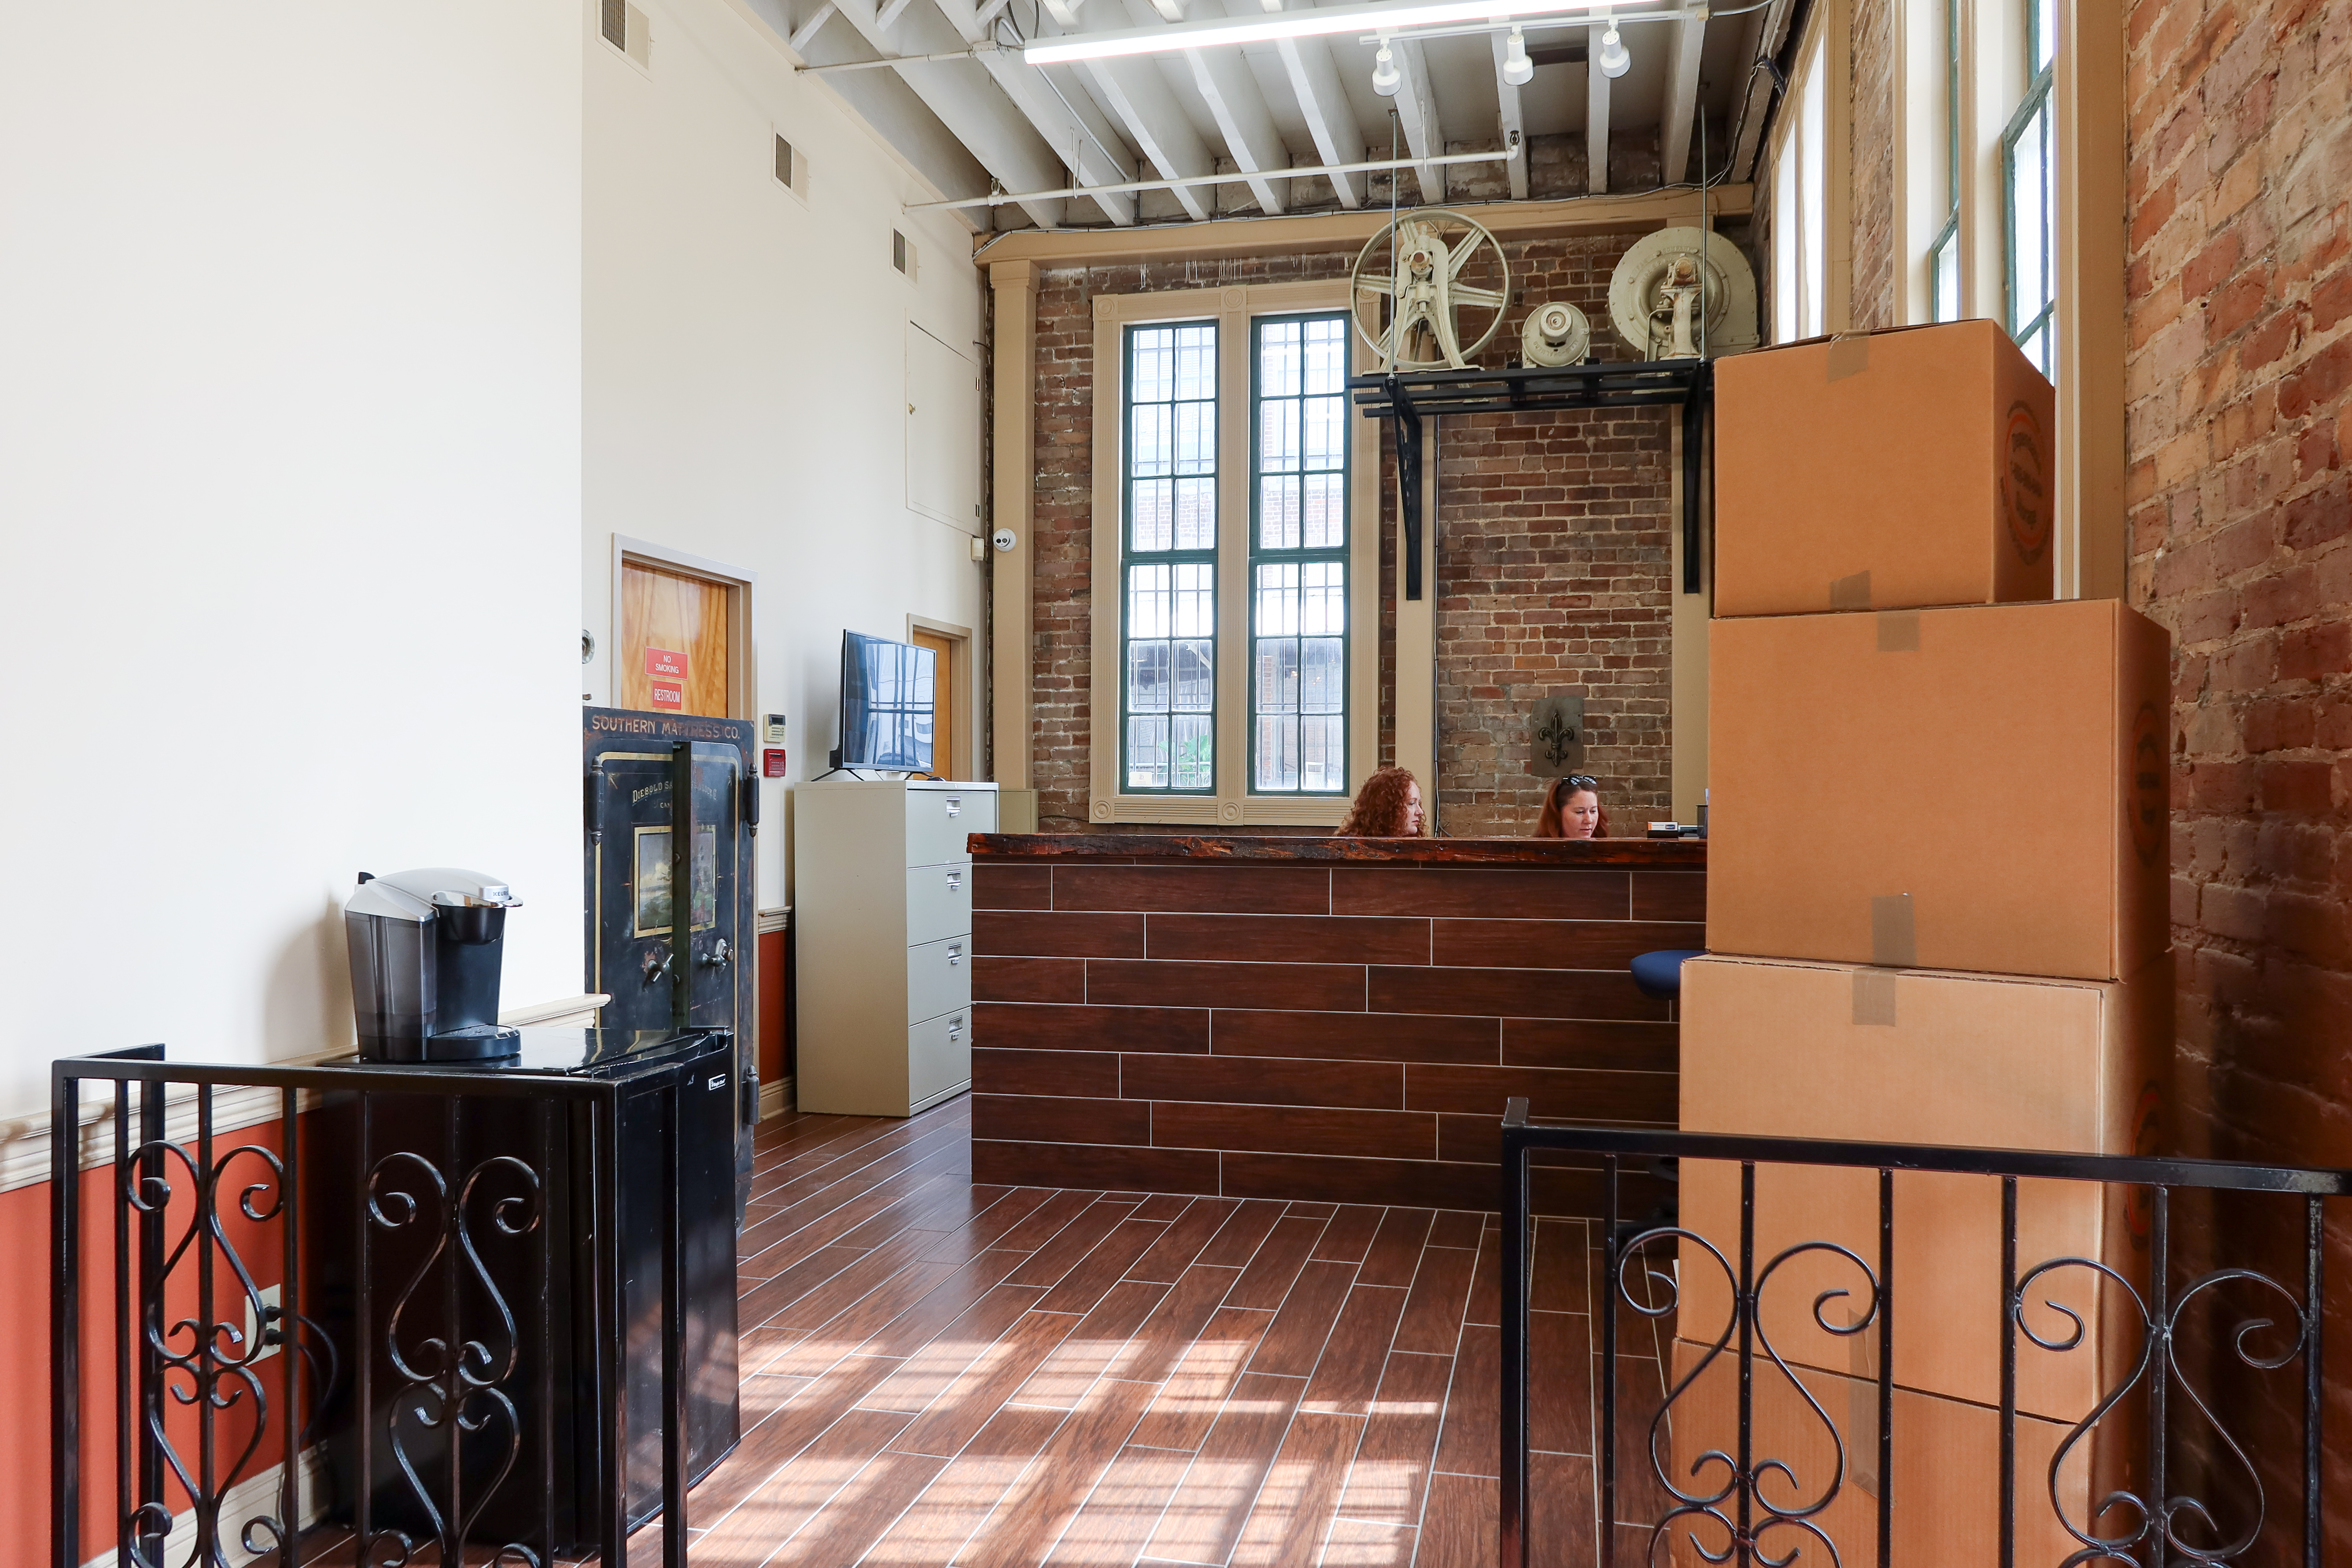 A welcoming storage facility reception area with a modern wooden counter, exposed brick walls, large windows, and neatly stacked cardboard boxes. Two staff members are seated behind the counter.